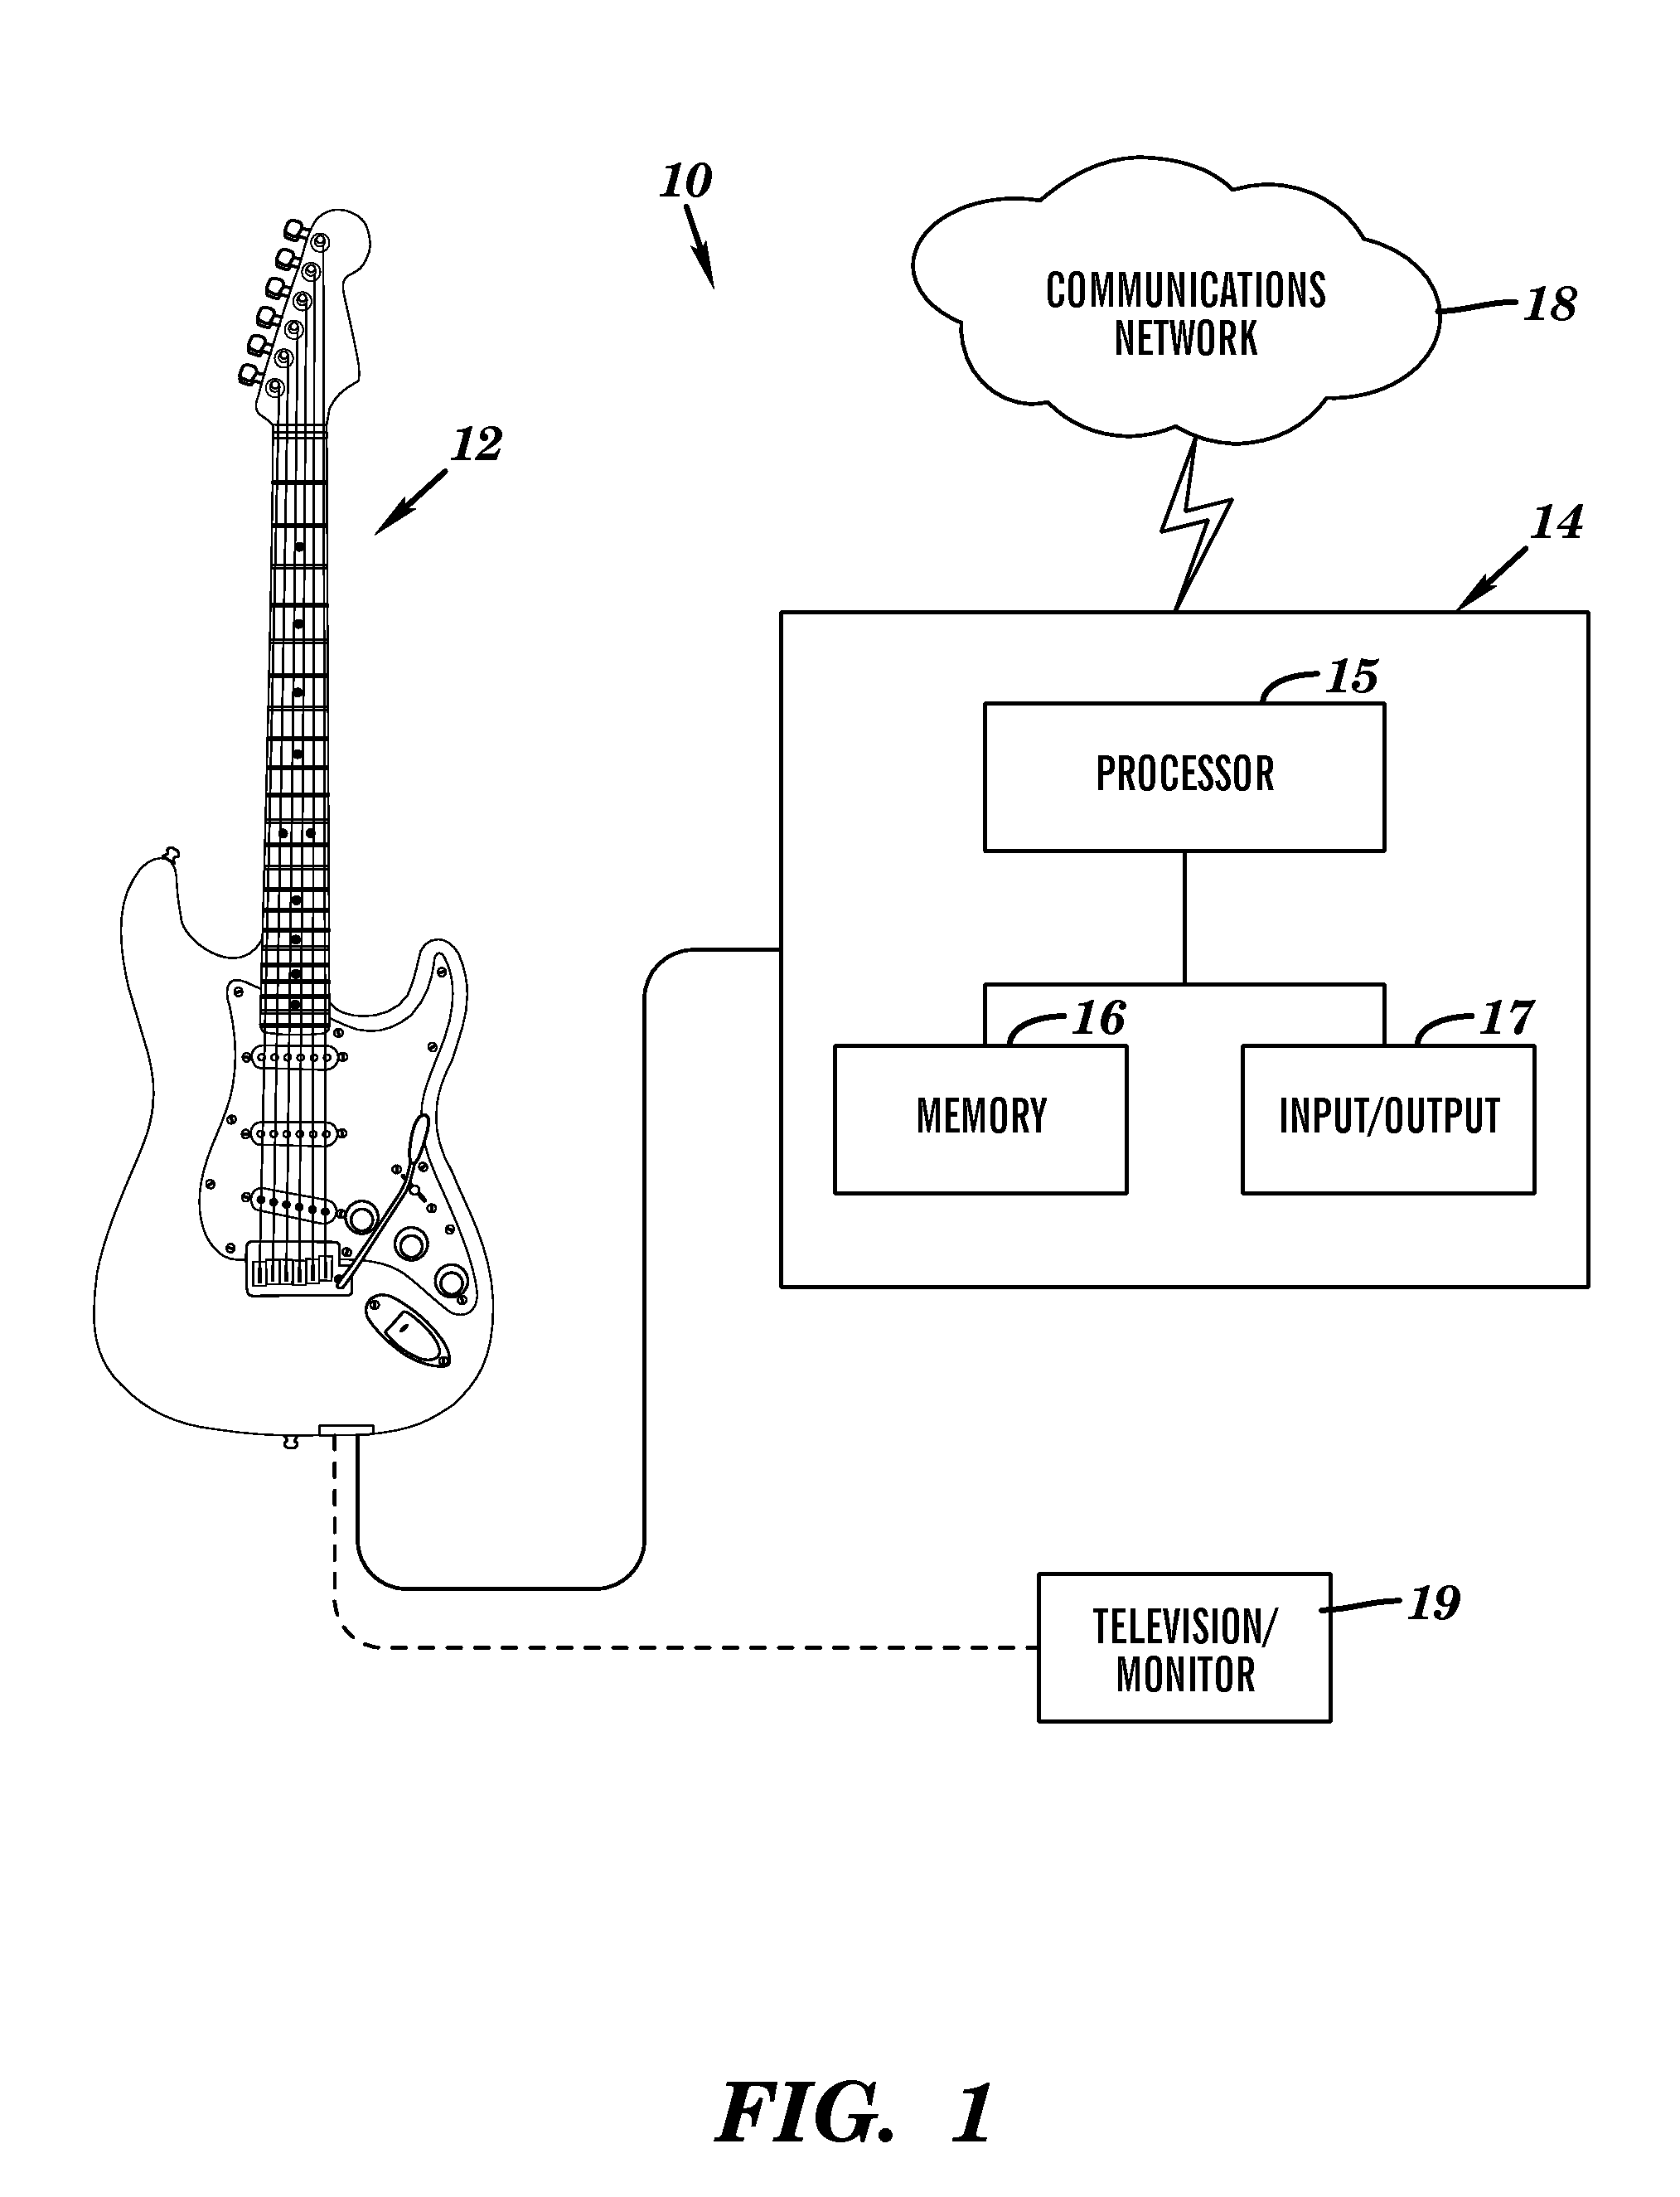 Self-teaching and entertainment guitar systems